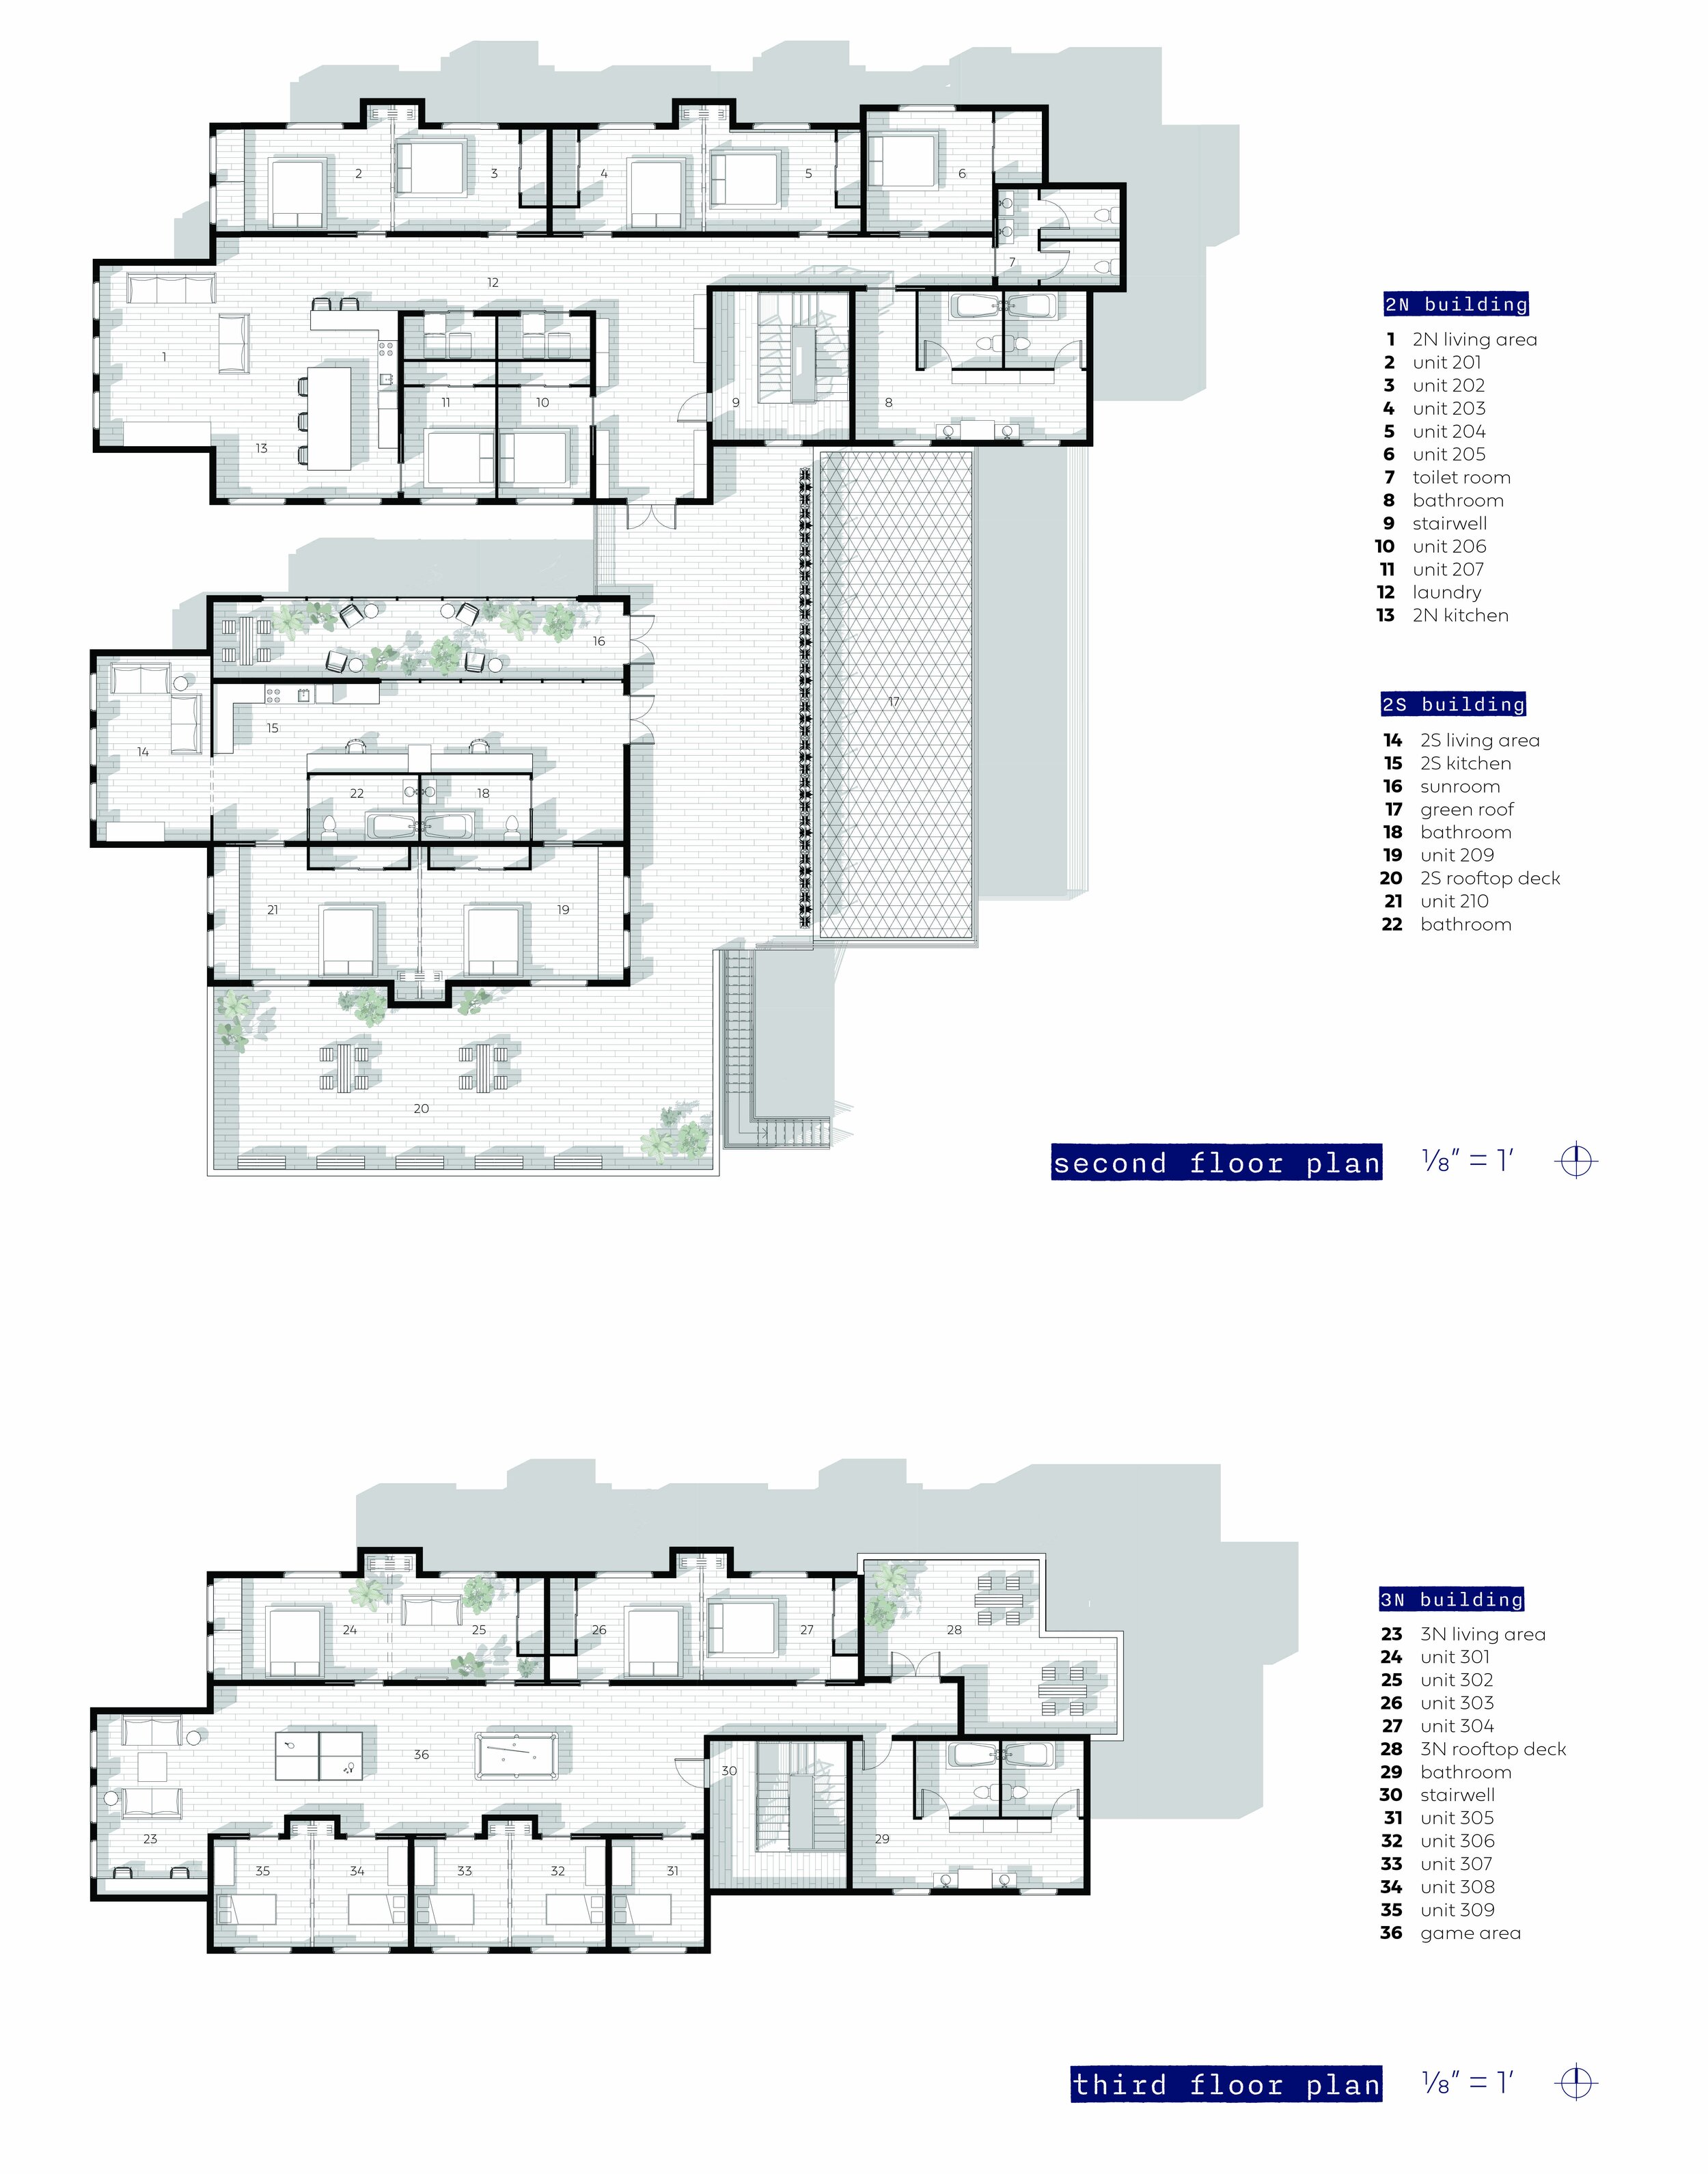 second and third floor plans.jpg